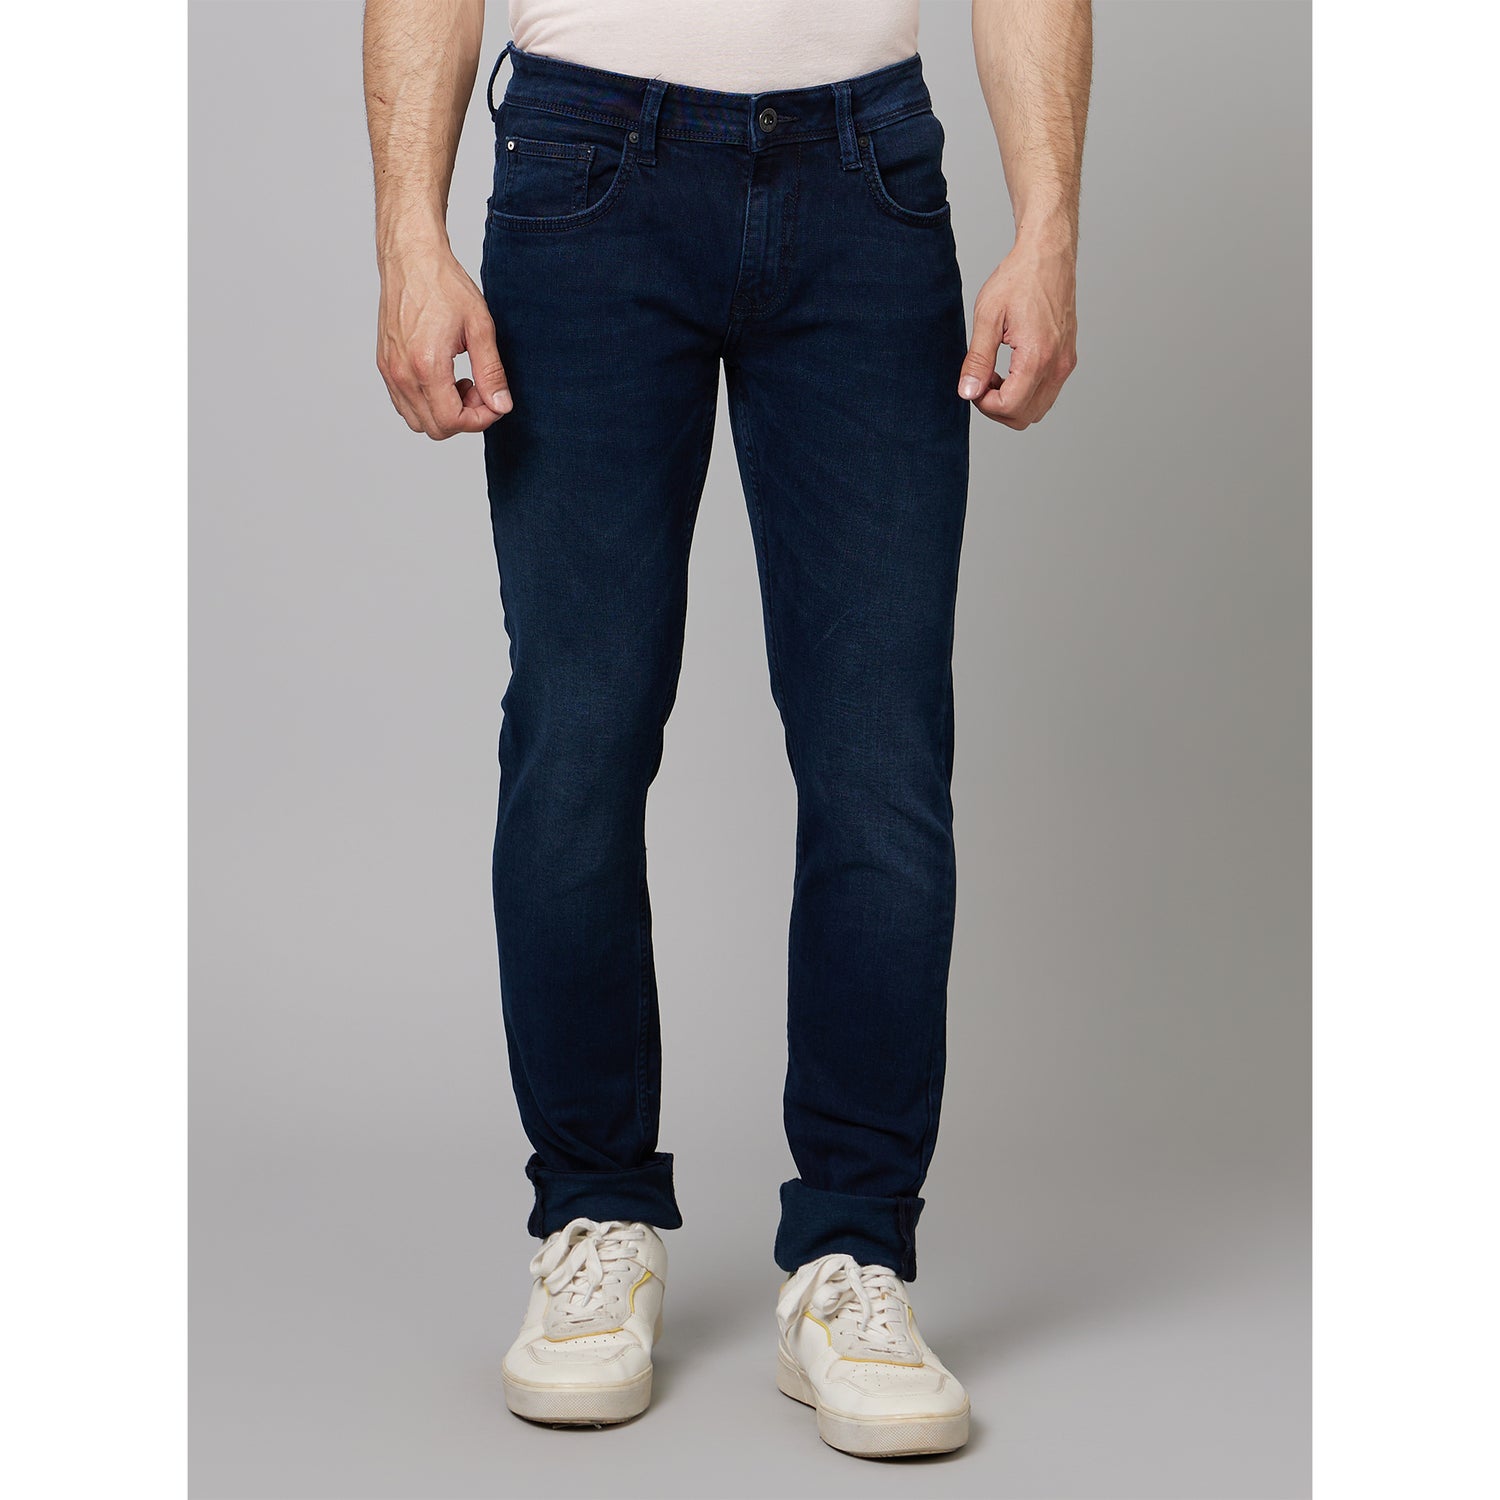 Navy Blue Slim Fit Light Fade Clean Look Stretchable Jeans (COLOU)